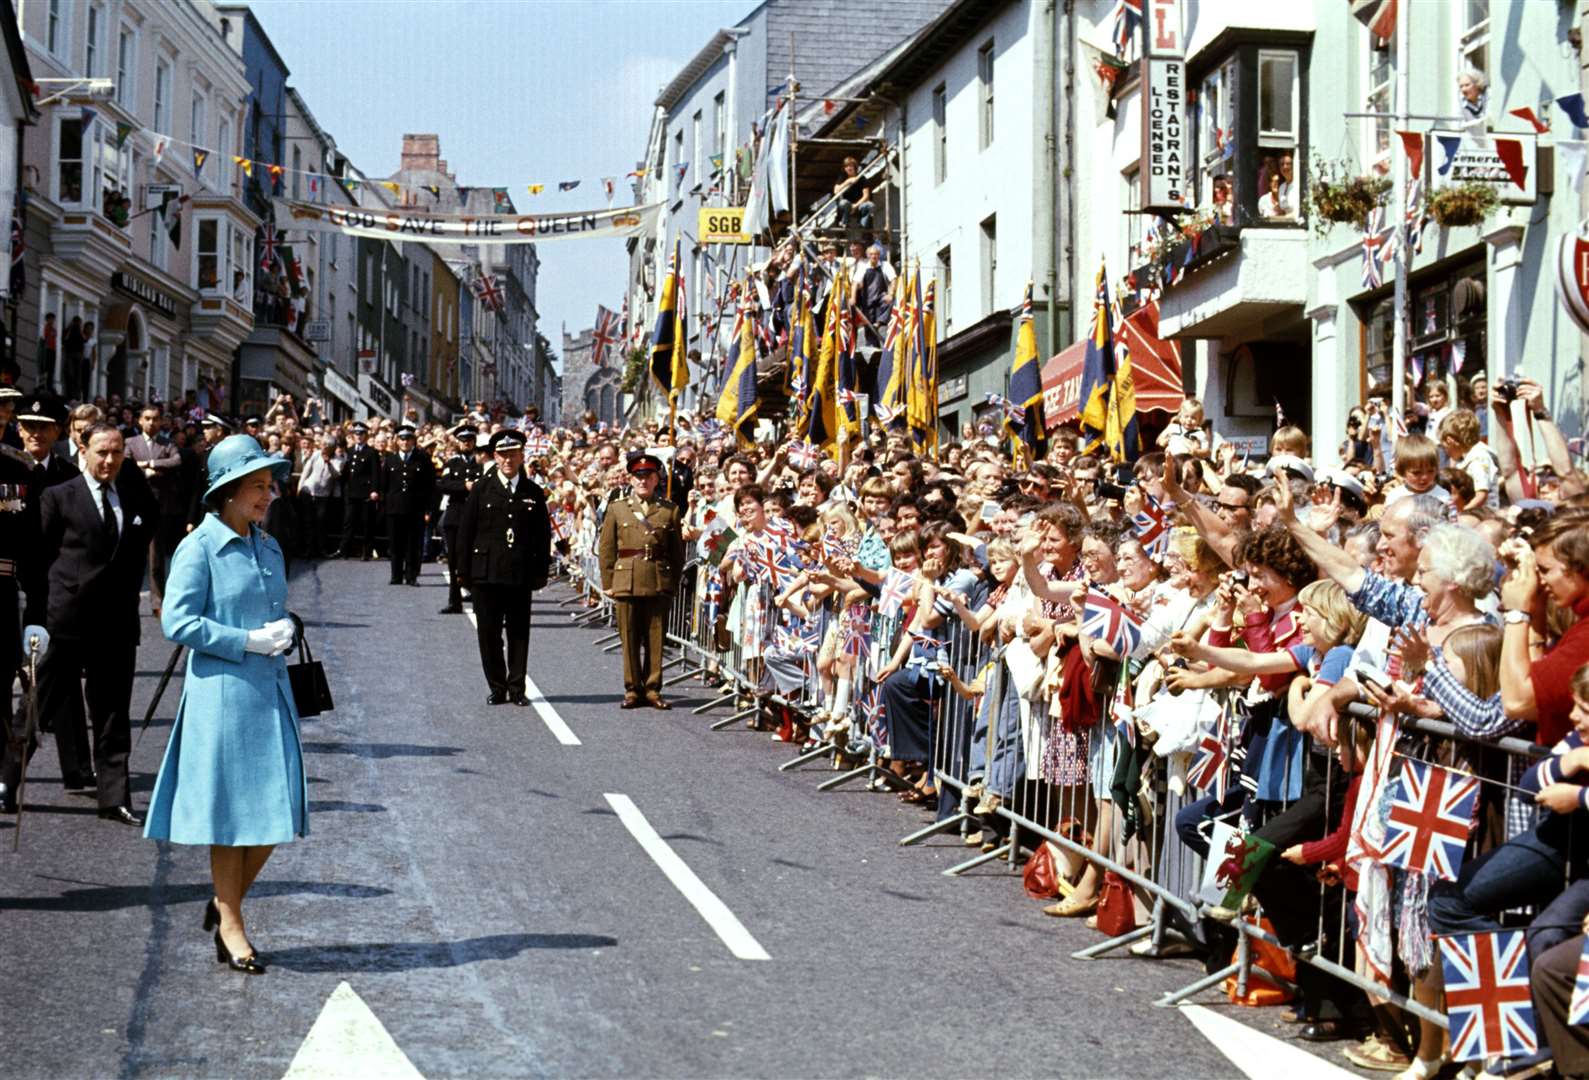 Queen Elizabeth II on a walkabout in 1977 in Haverfordwest, Pembrokeshire, Wales. The Queen’s 1977 Silver Jubilee saw millions celebrating her reign at street parties across the country and the affection shown by crowds was a surprise even to the Queen (Ron Bell/PA)